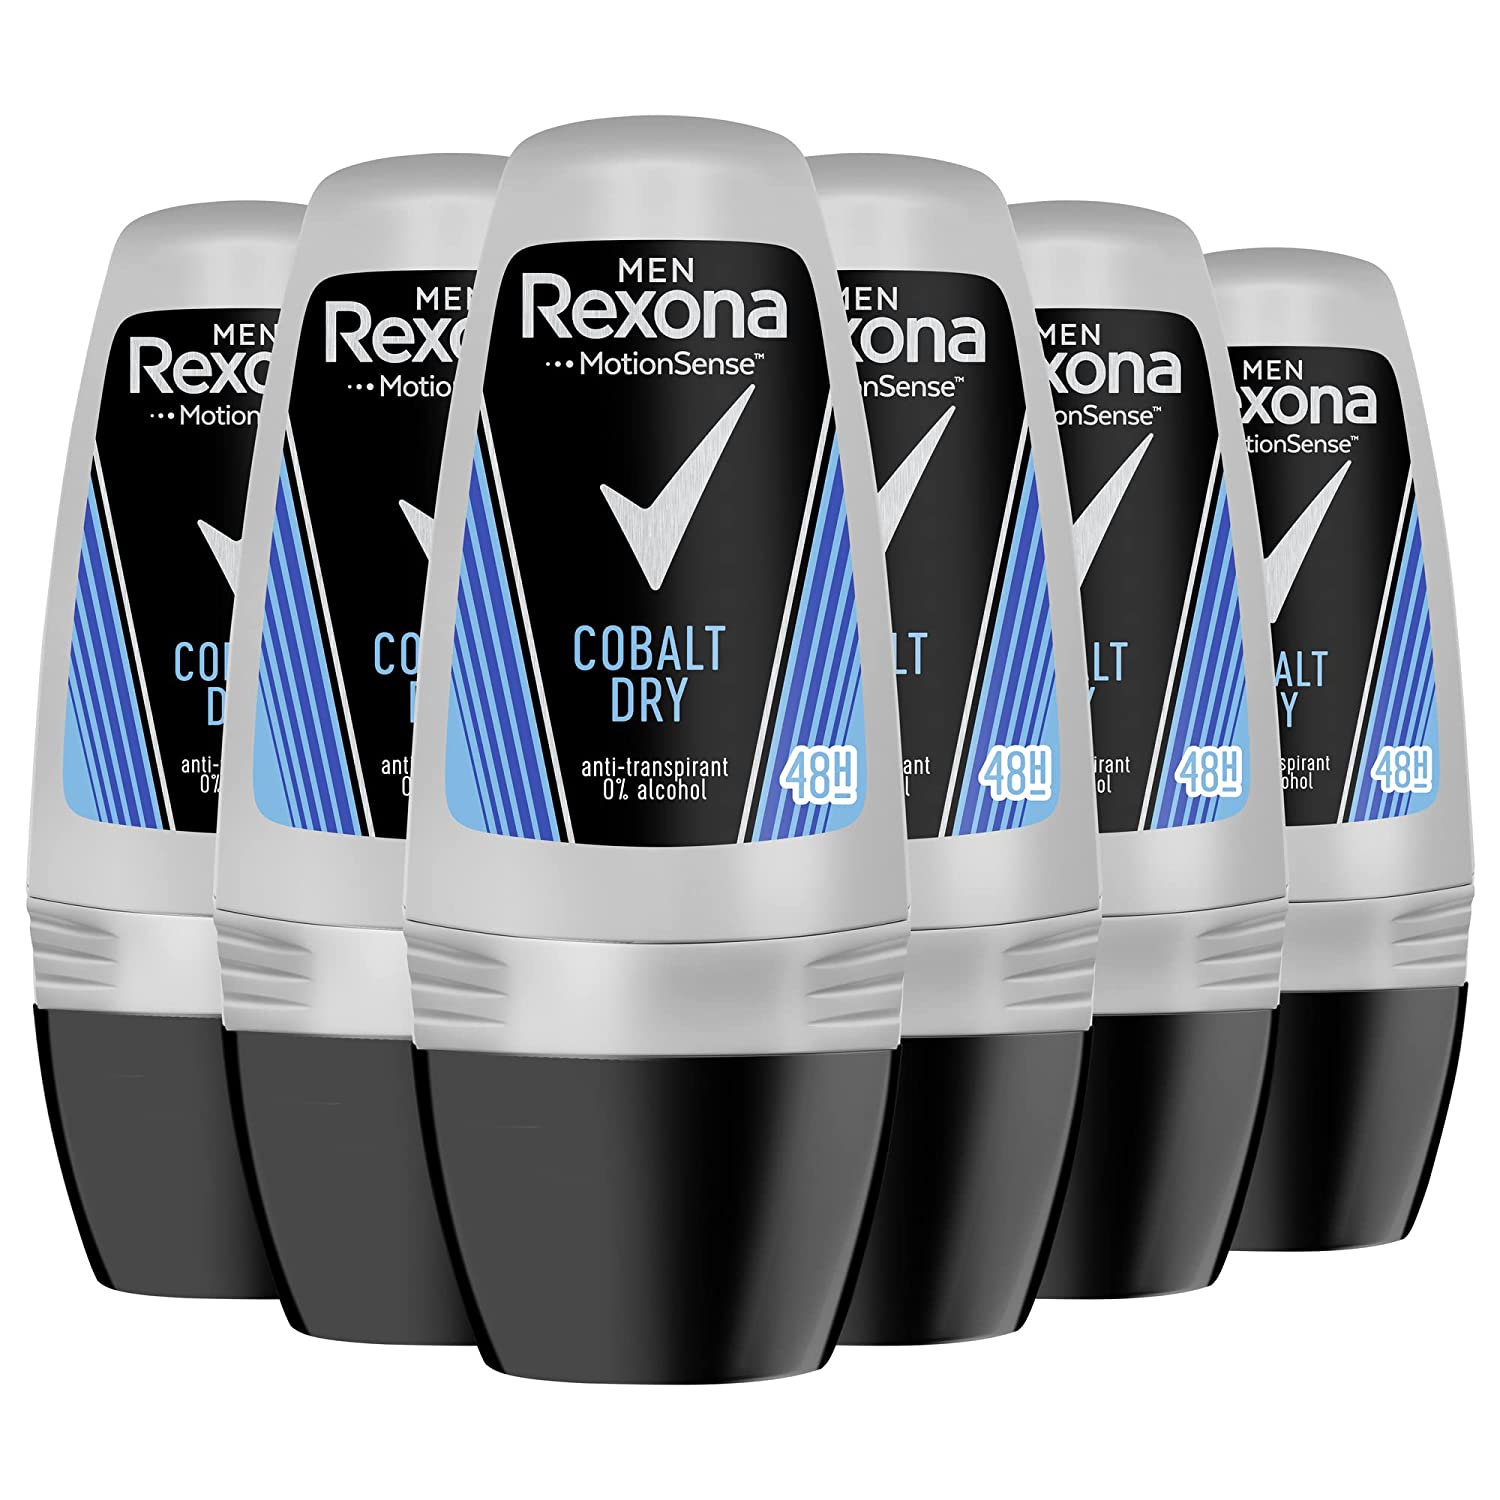 Rexona Men MotionSense Roll-On Deodorant Cobalt Dry Antiperspirant with 48 Hour Protection Against Body Odour and Underarm Wetness 50 ml Pack of 6